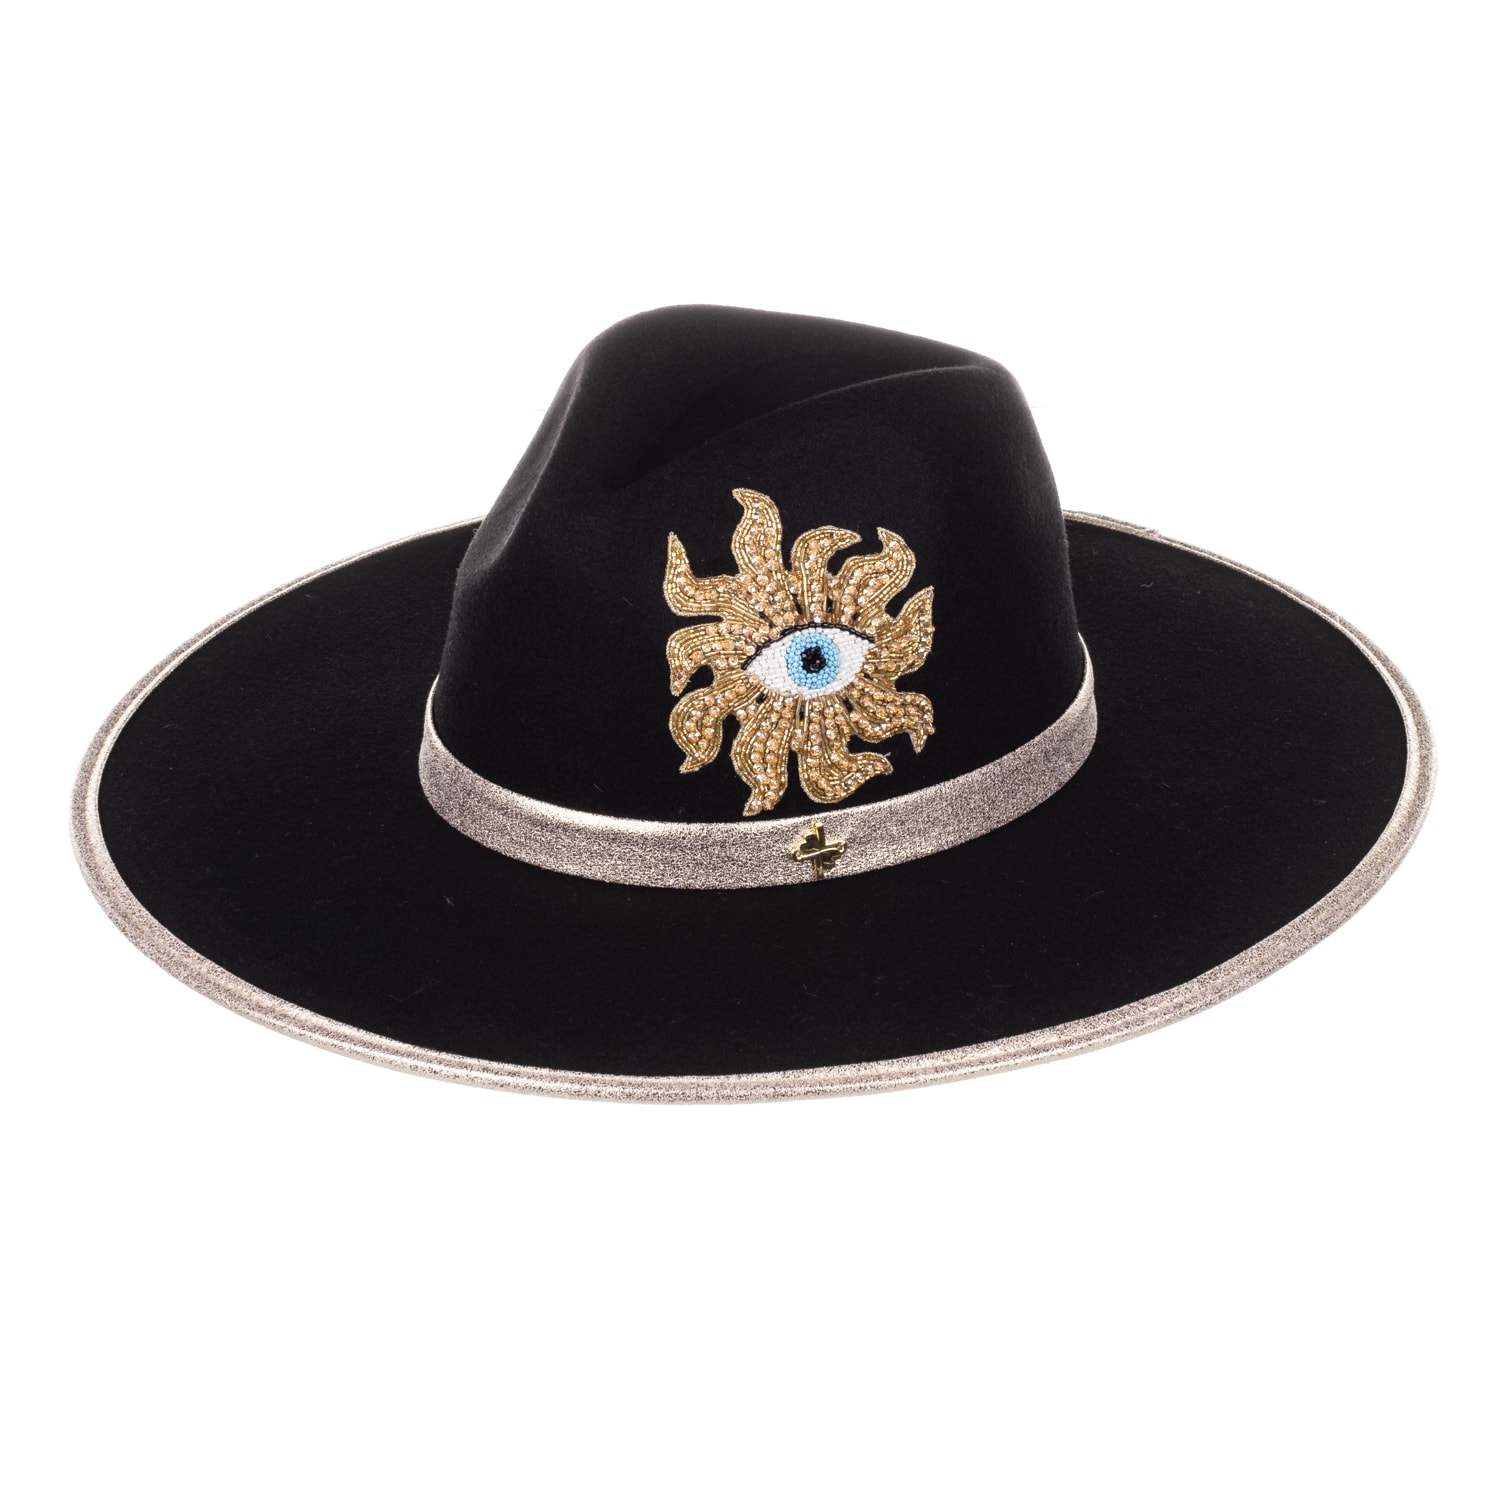 Women’s Laines London Black Couture Fedora Hat With Embellished Mystic Eye One Size